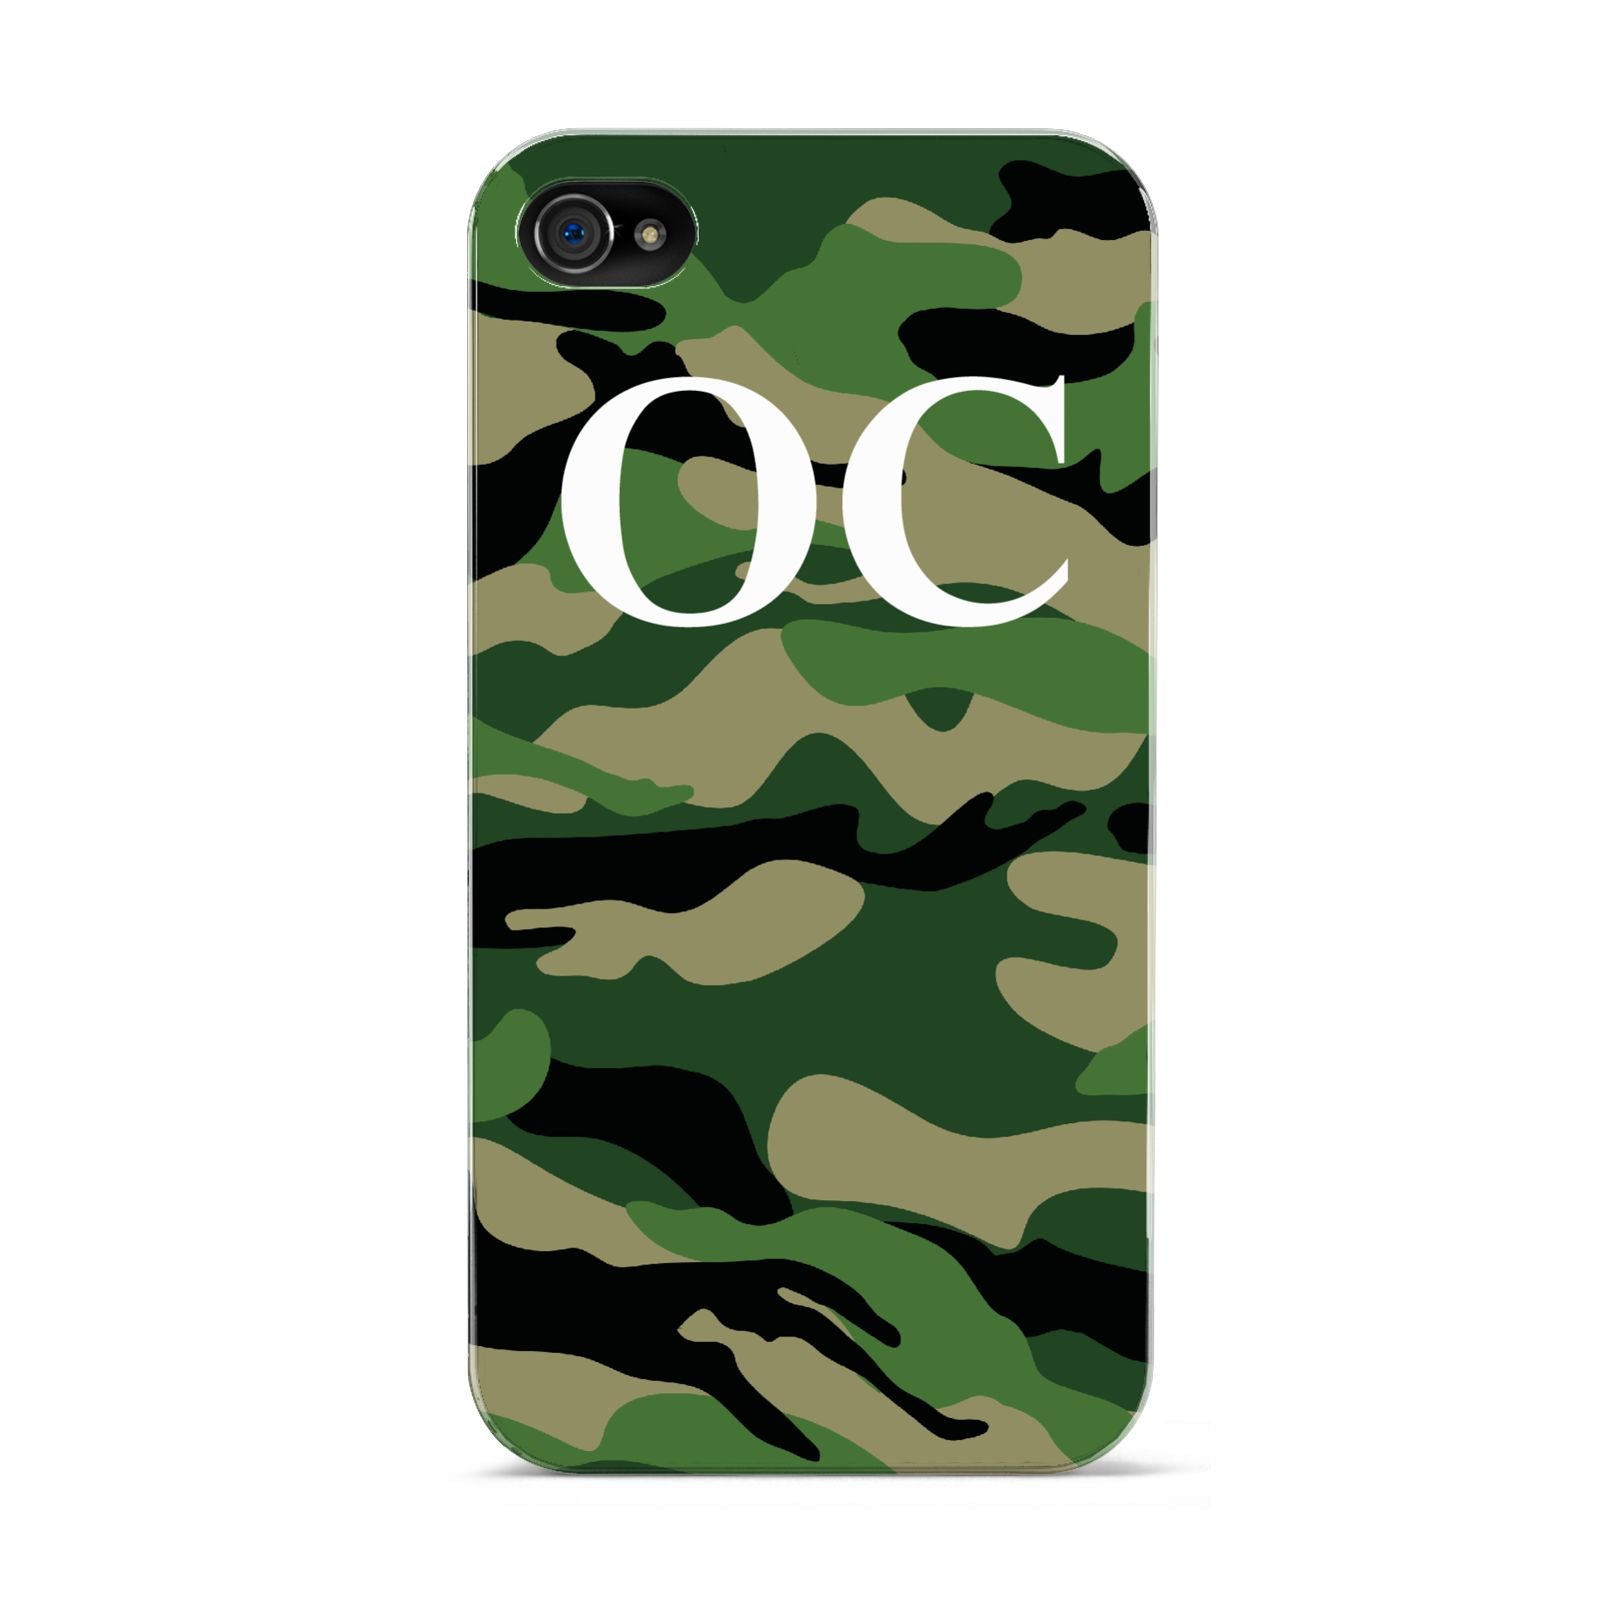 Personalised Camouflage Apple iPhone 4s Case